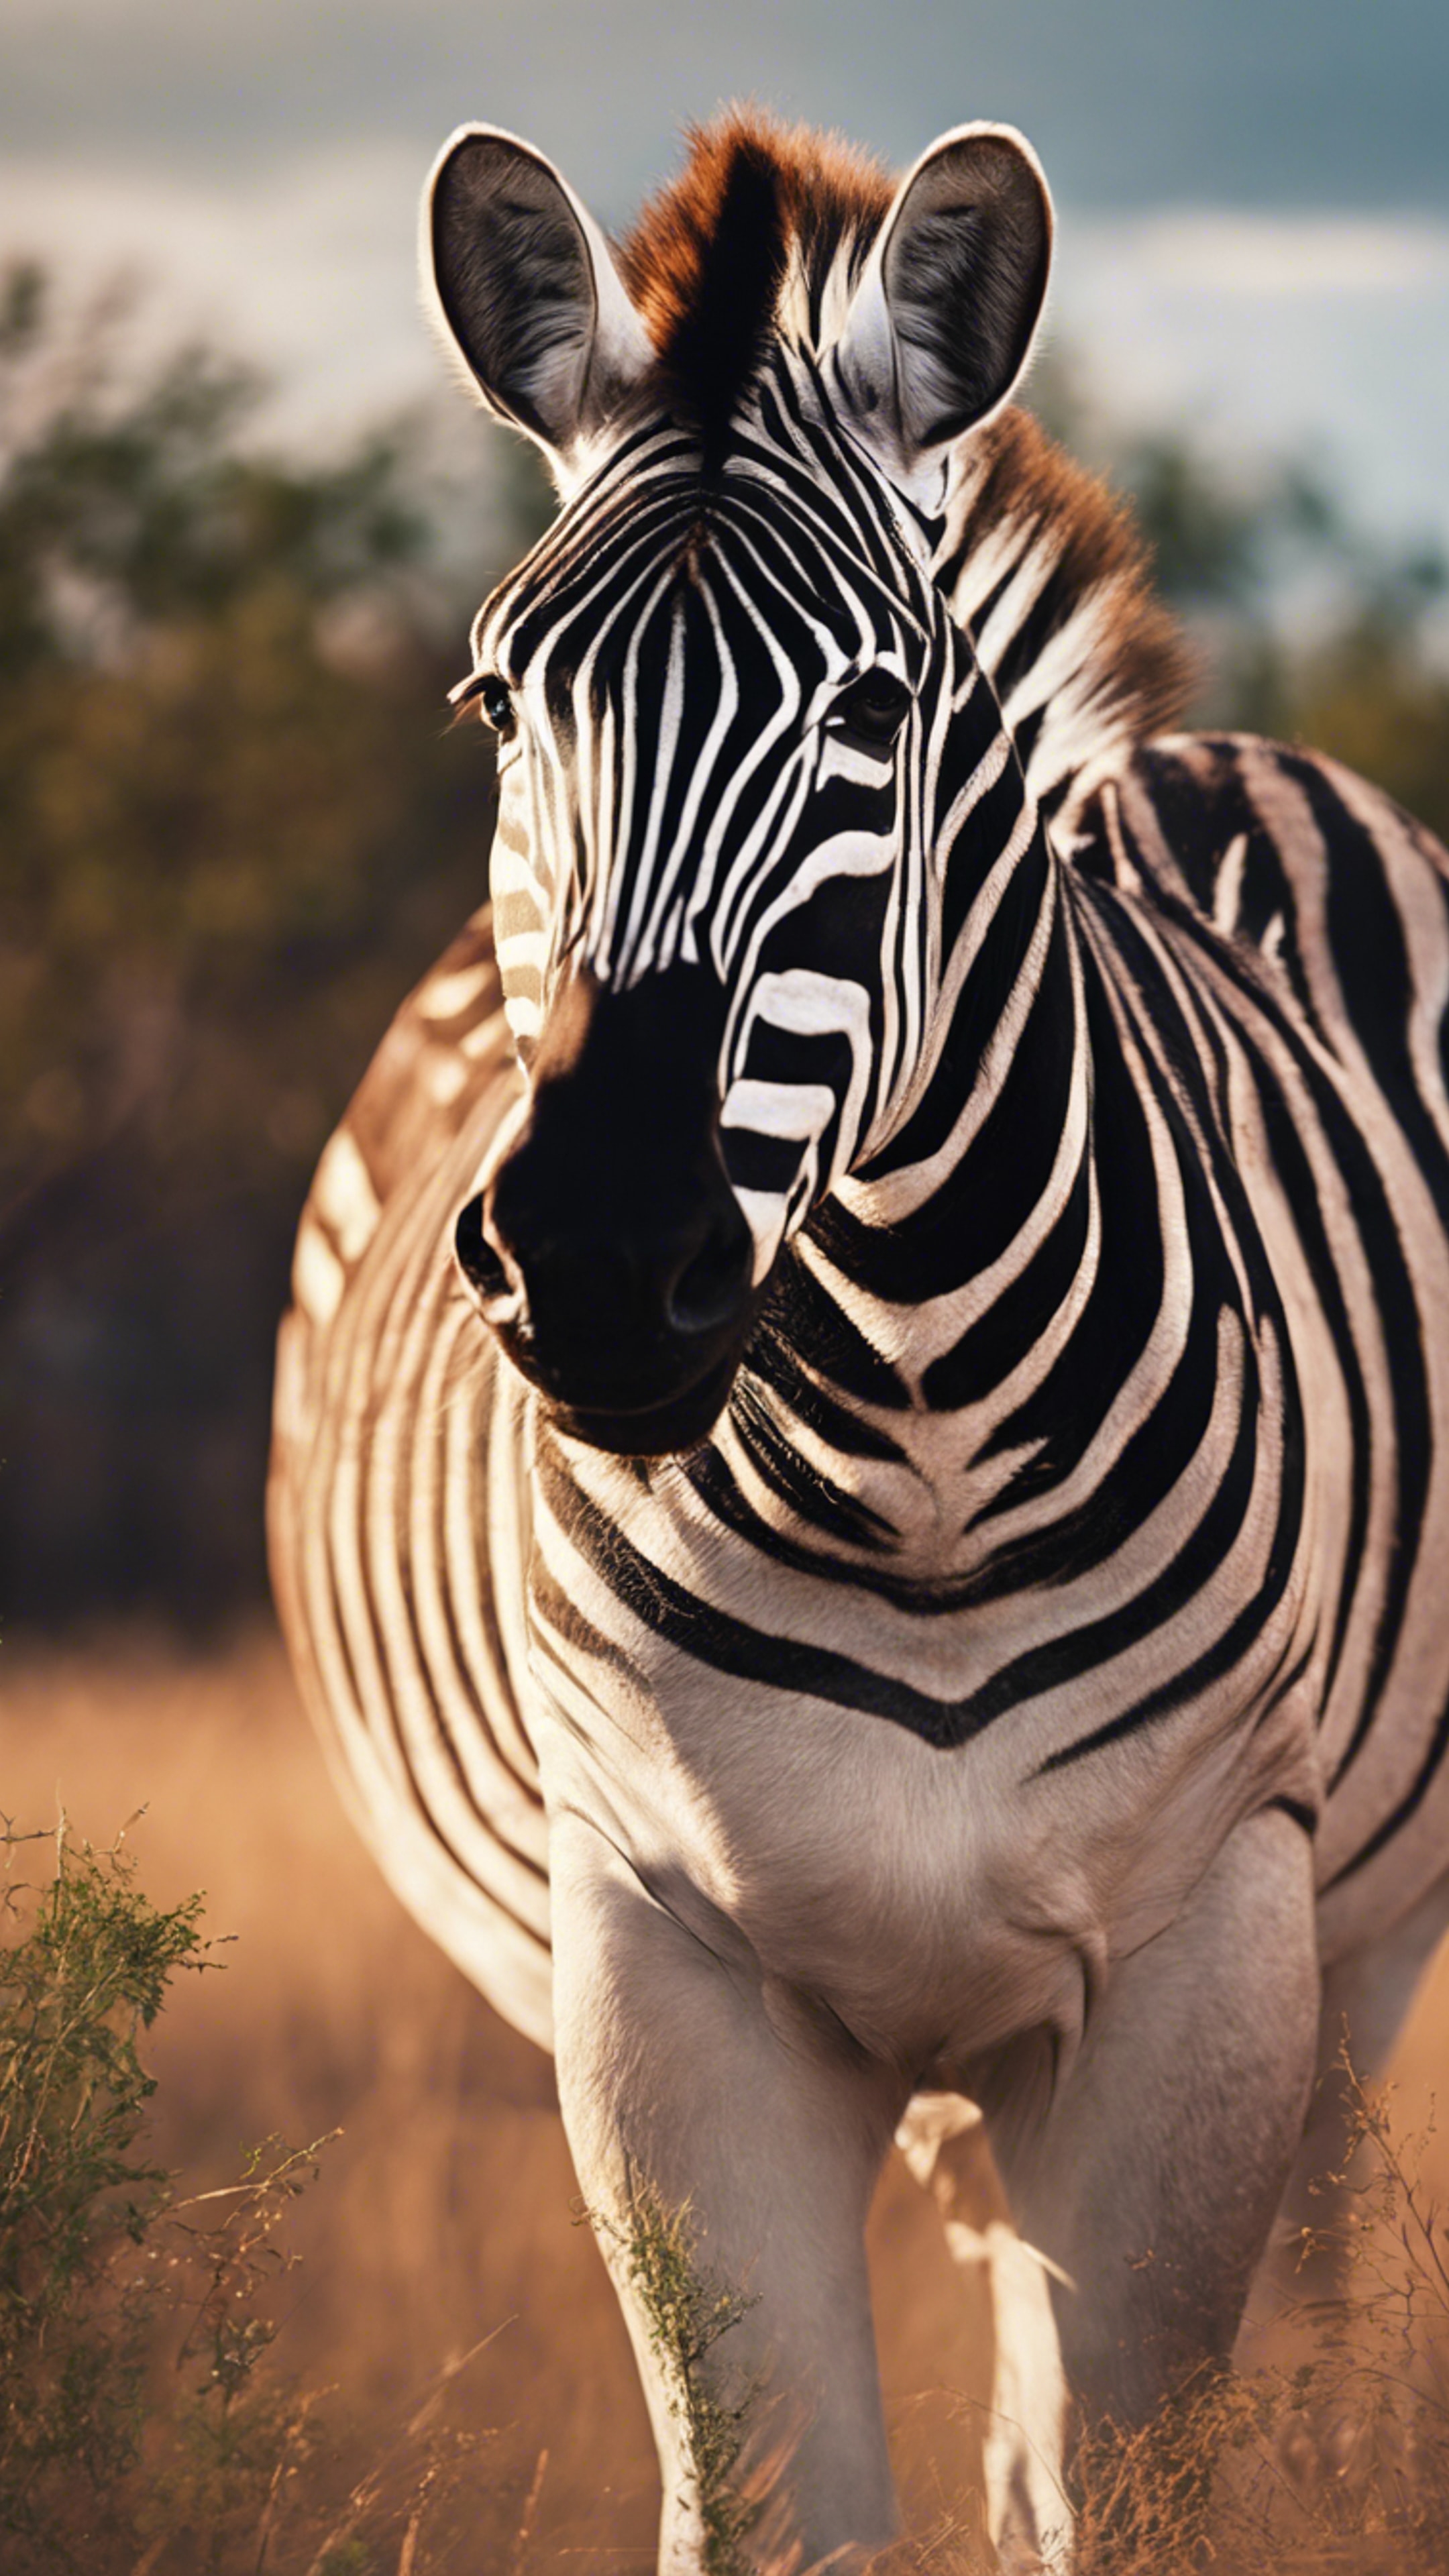 A zebra standing tall in the savannah, a rainbow adorning the sky behind. Wallpaper[3c5be852003340b6a5f0]